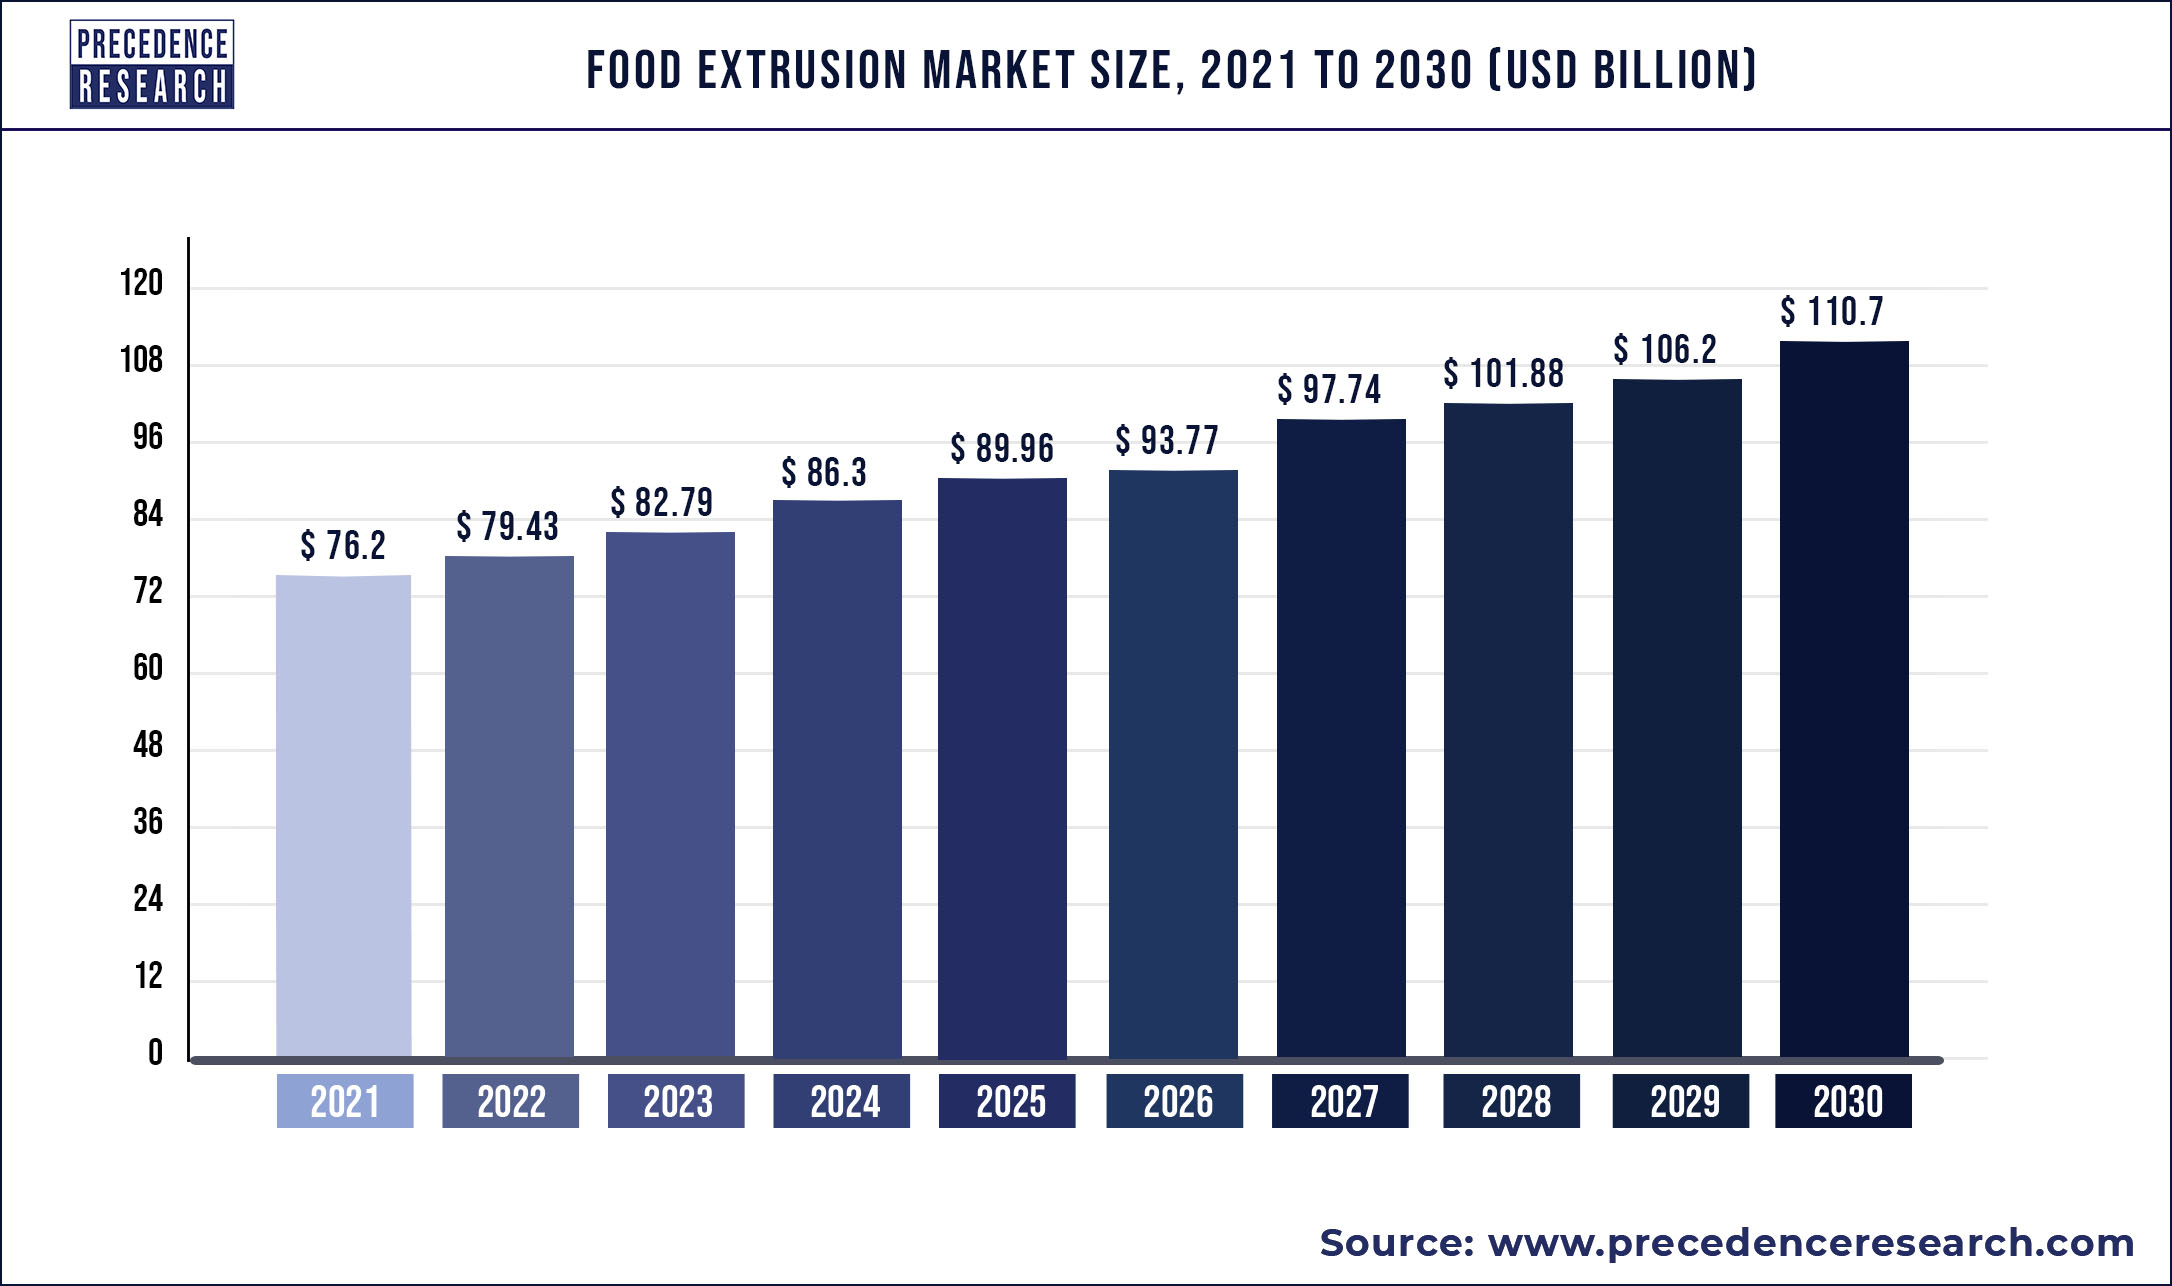 Food Extrusion Market Size is Forecasted to Reach US$ 110.7 Billion by 2030